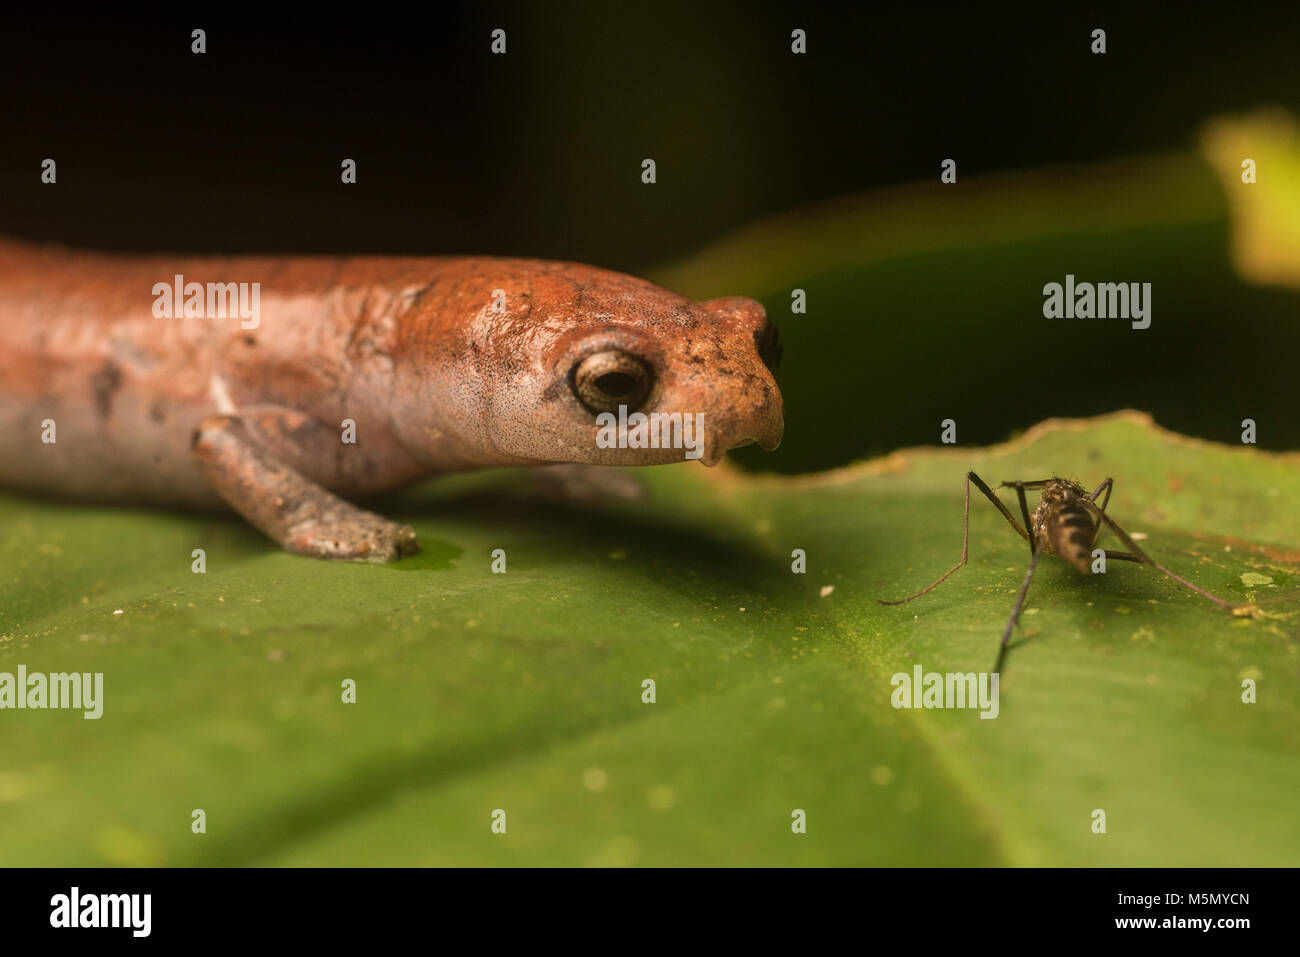 A nauta salamander (Bolitoglossa altamazonica) eyes a mosquito that has approached too closely.  A few seconds later the mosquito was eaten. Stock Photo